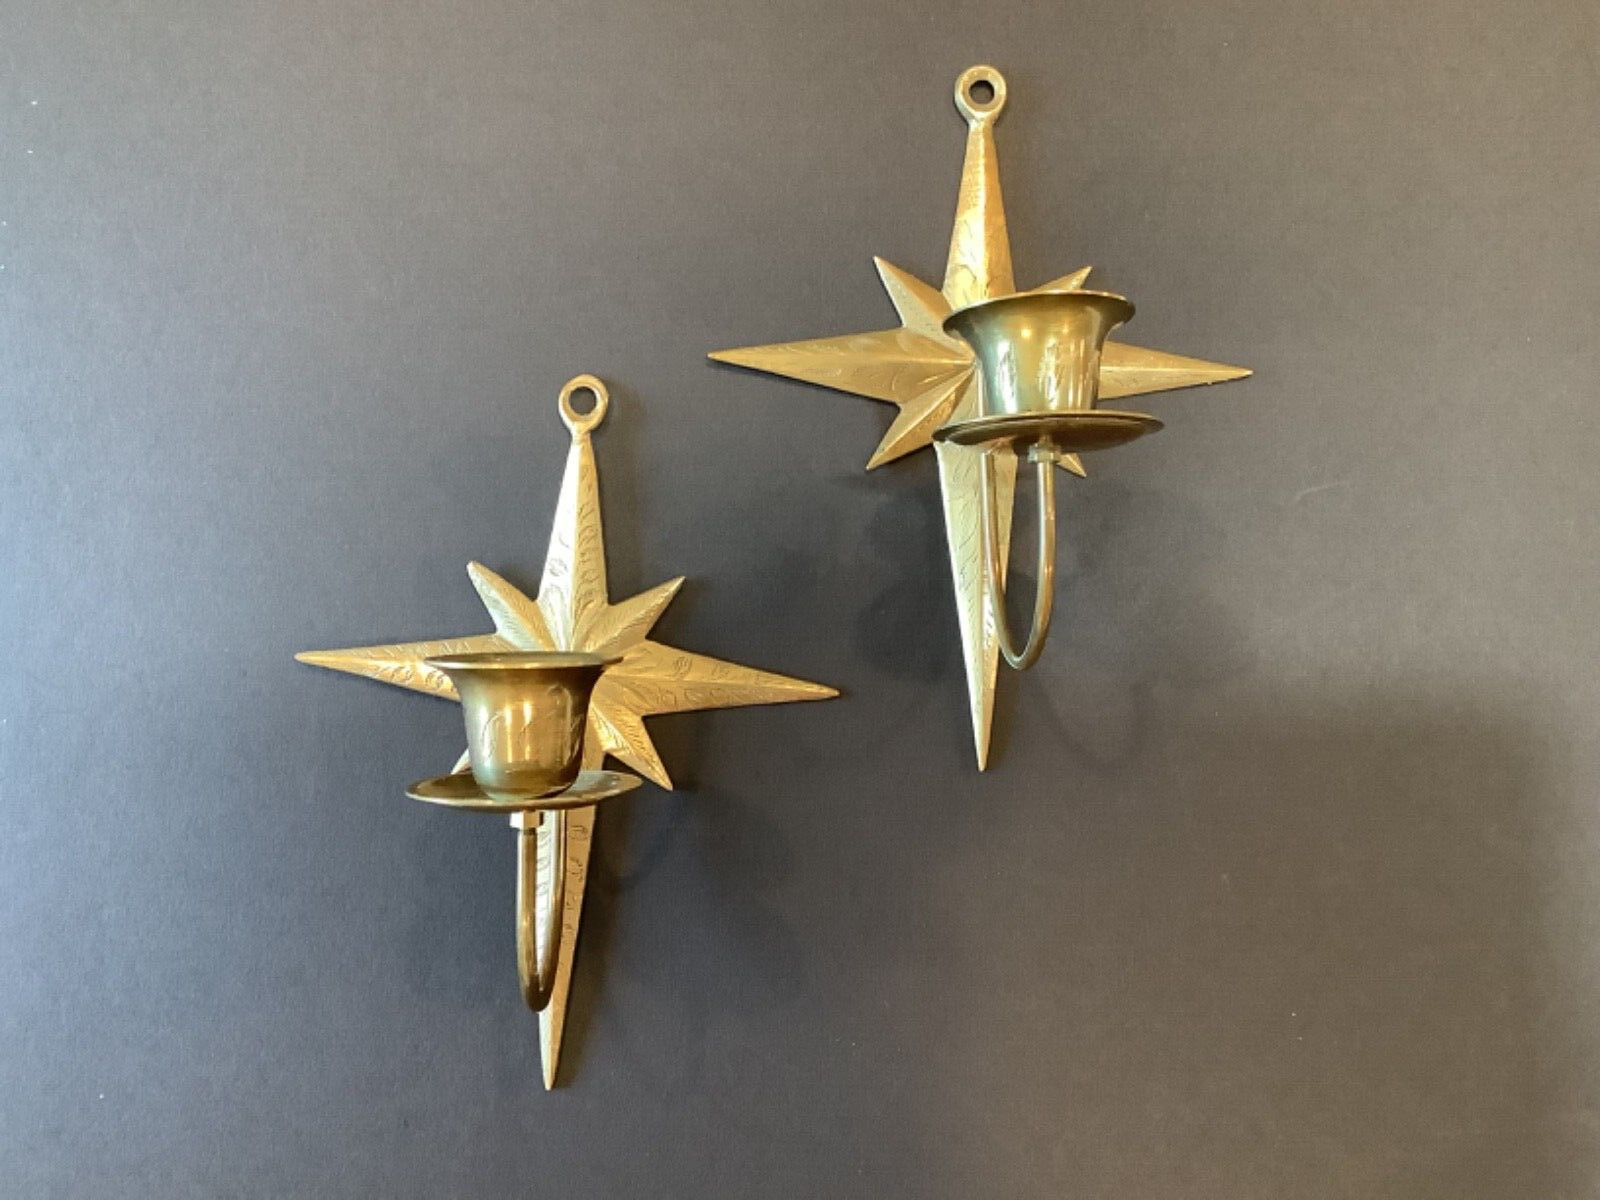 Pair of Brass Star Candle Wall Sconce MCM Starburst Celestial Candleholder